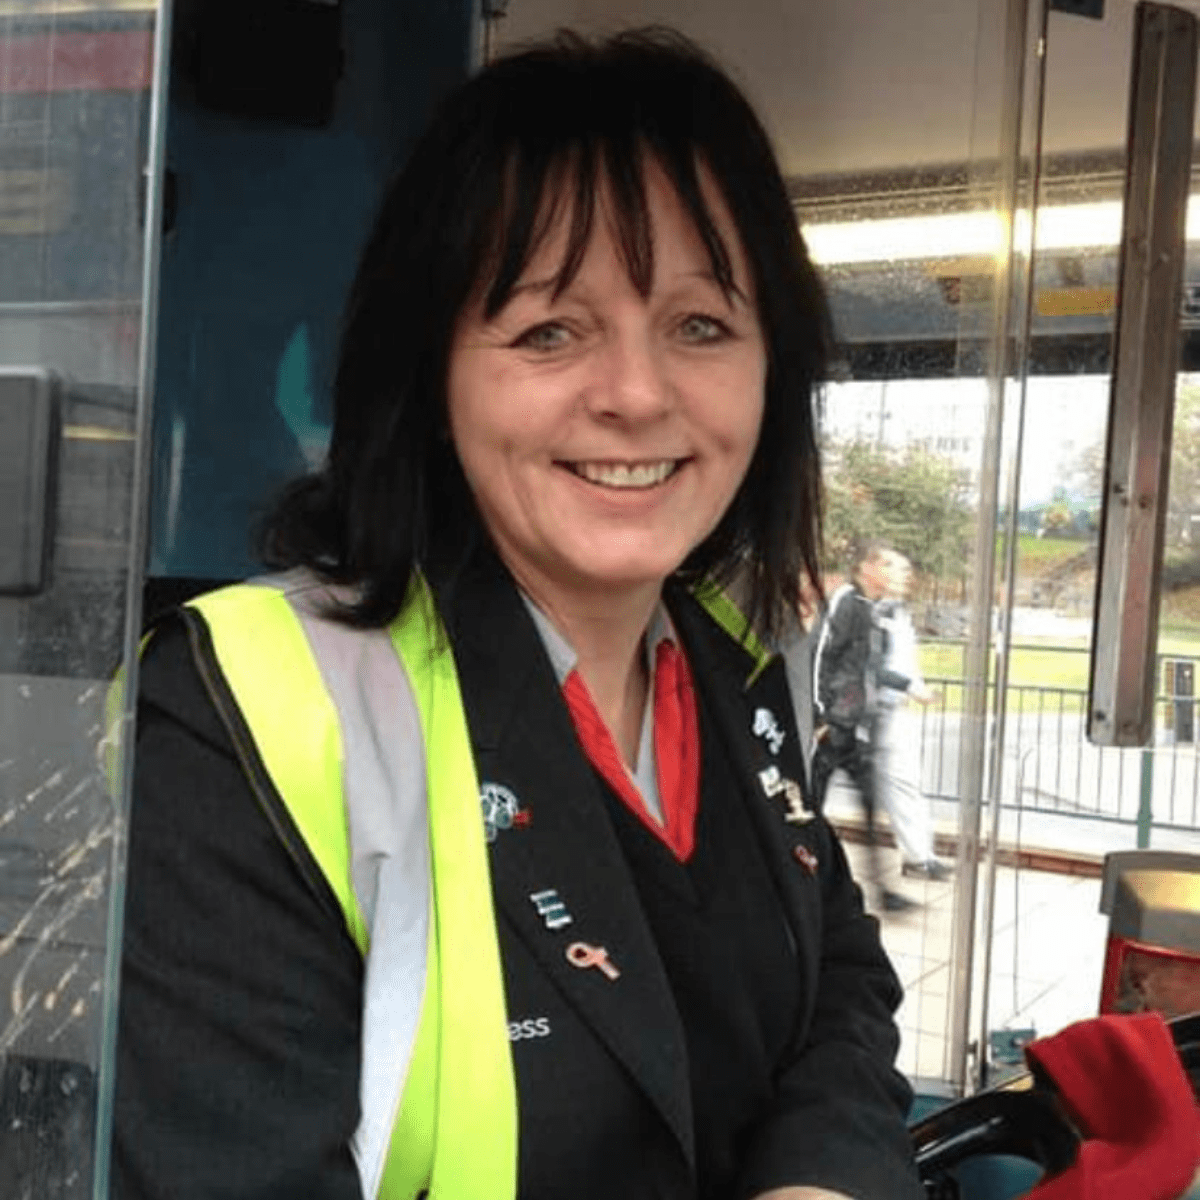 Question time with Mandy Barritt, driver at Birmingham Central garage